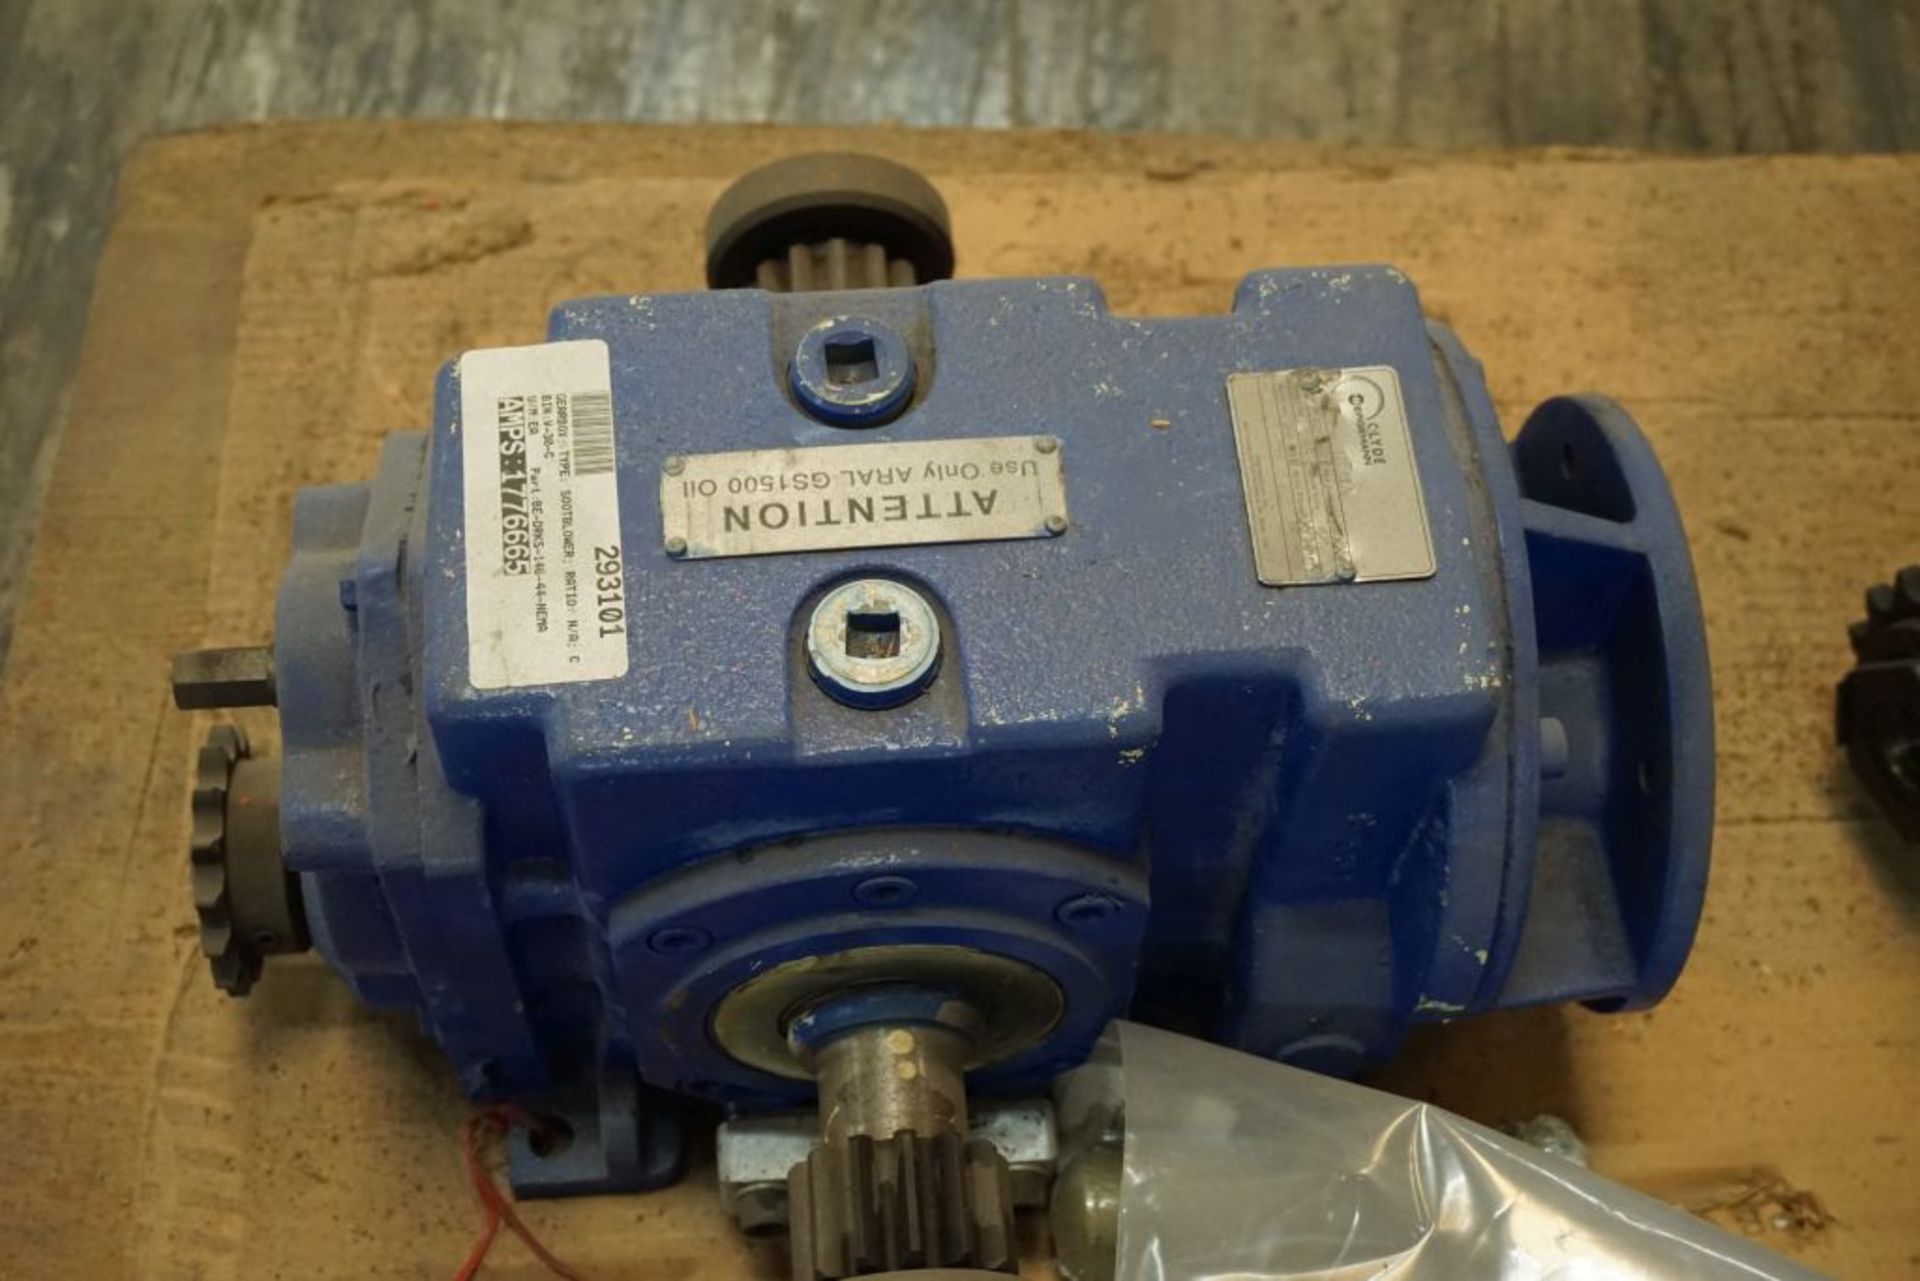 Lot of (5) Gearboxes|Lot Loading Fee: $5.00 - Image 21 of 22